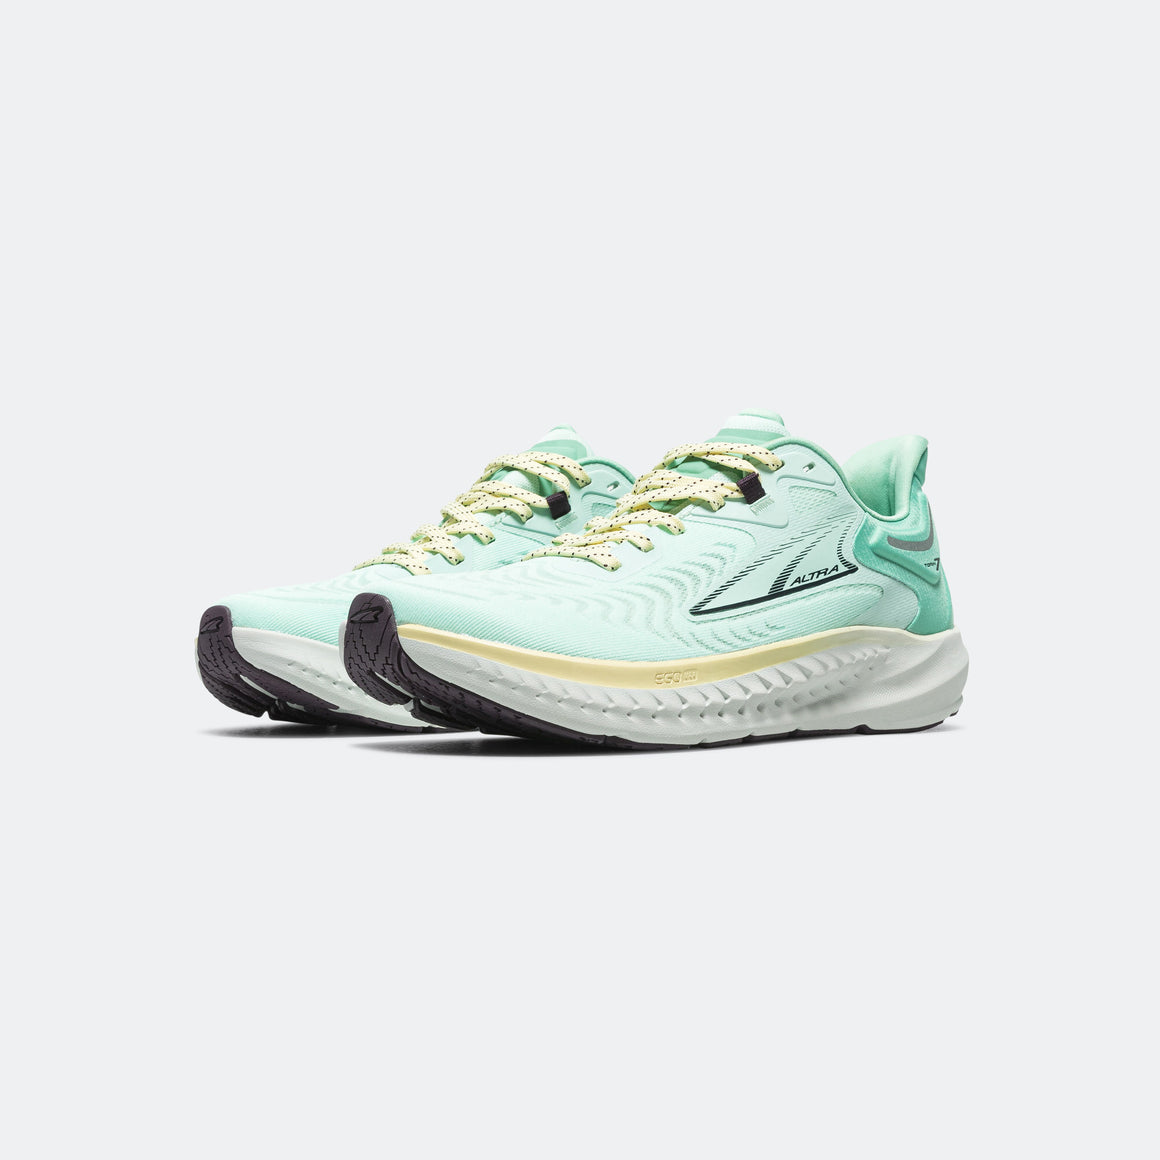 Altra - Womens Torrin 7 - Mint - Up There Athletics